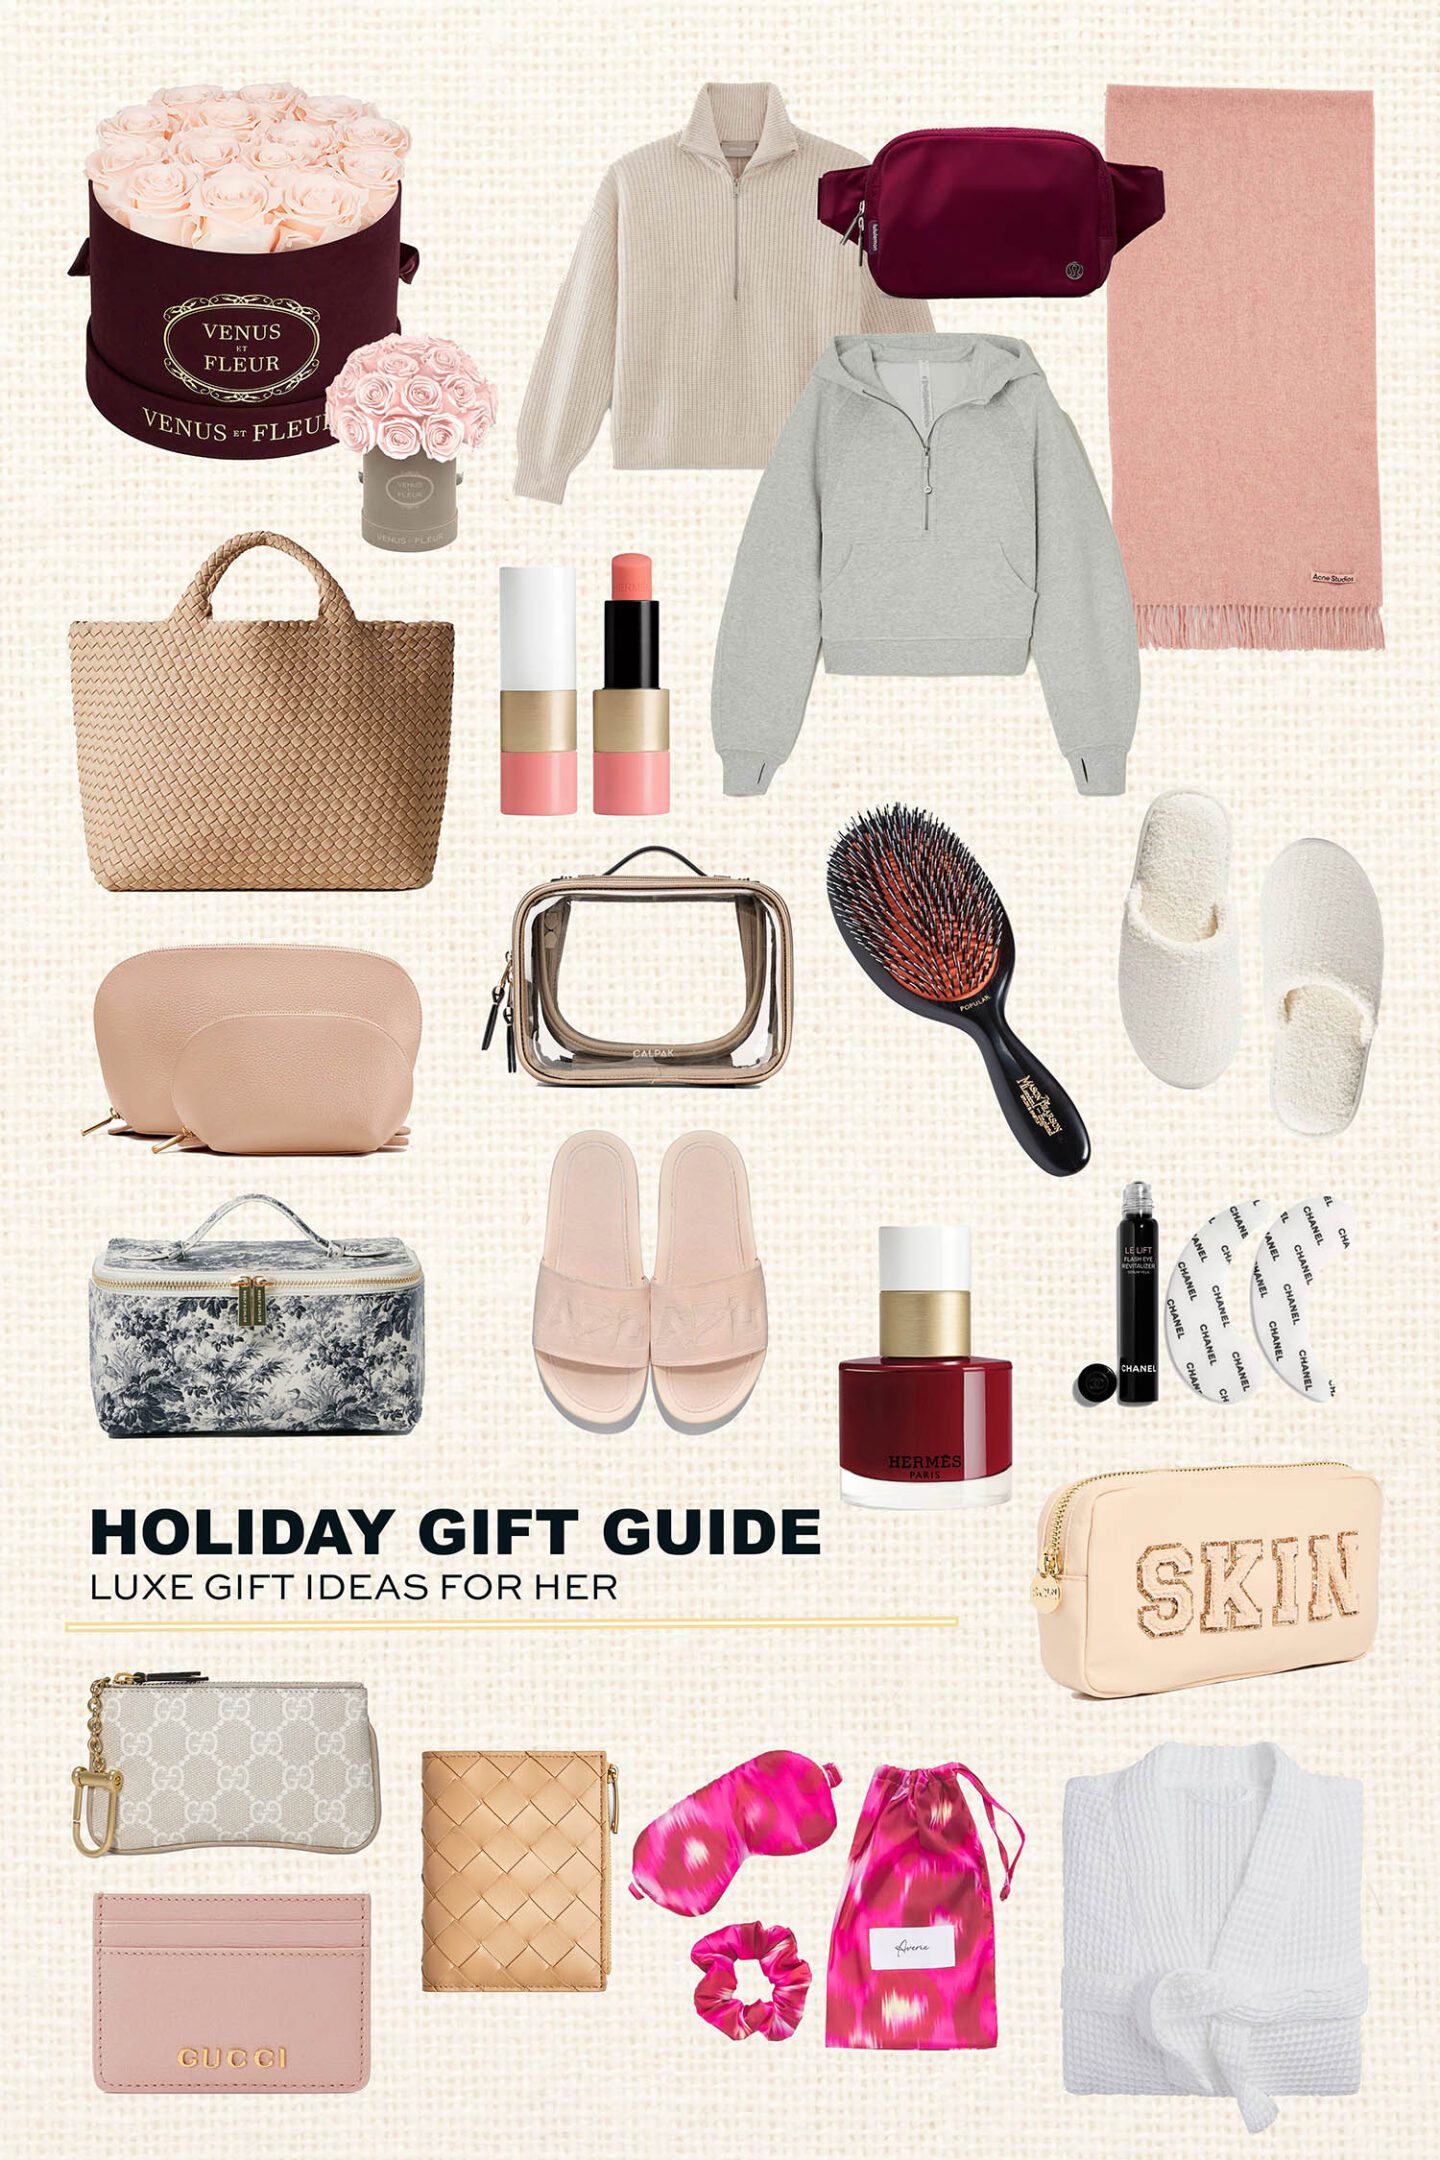 Luxe Gift Ideas for Her